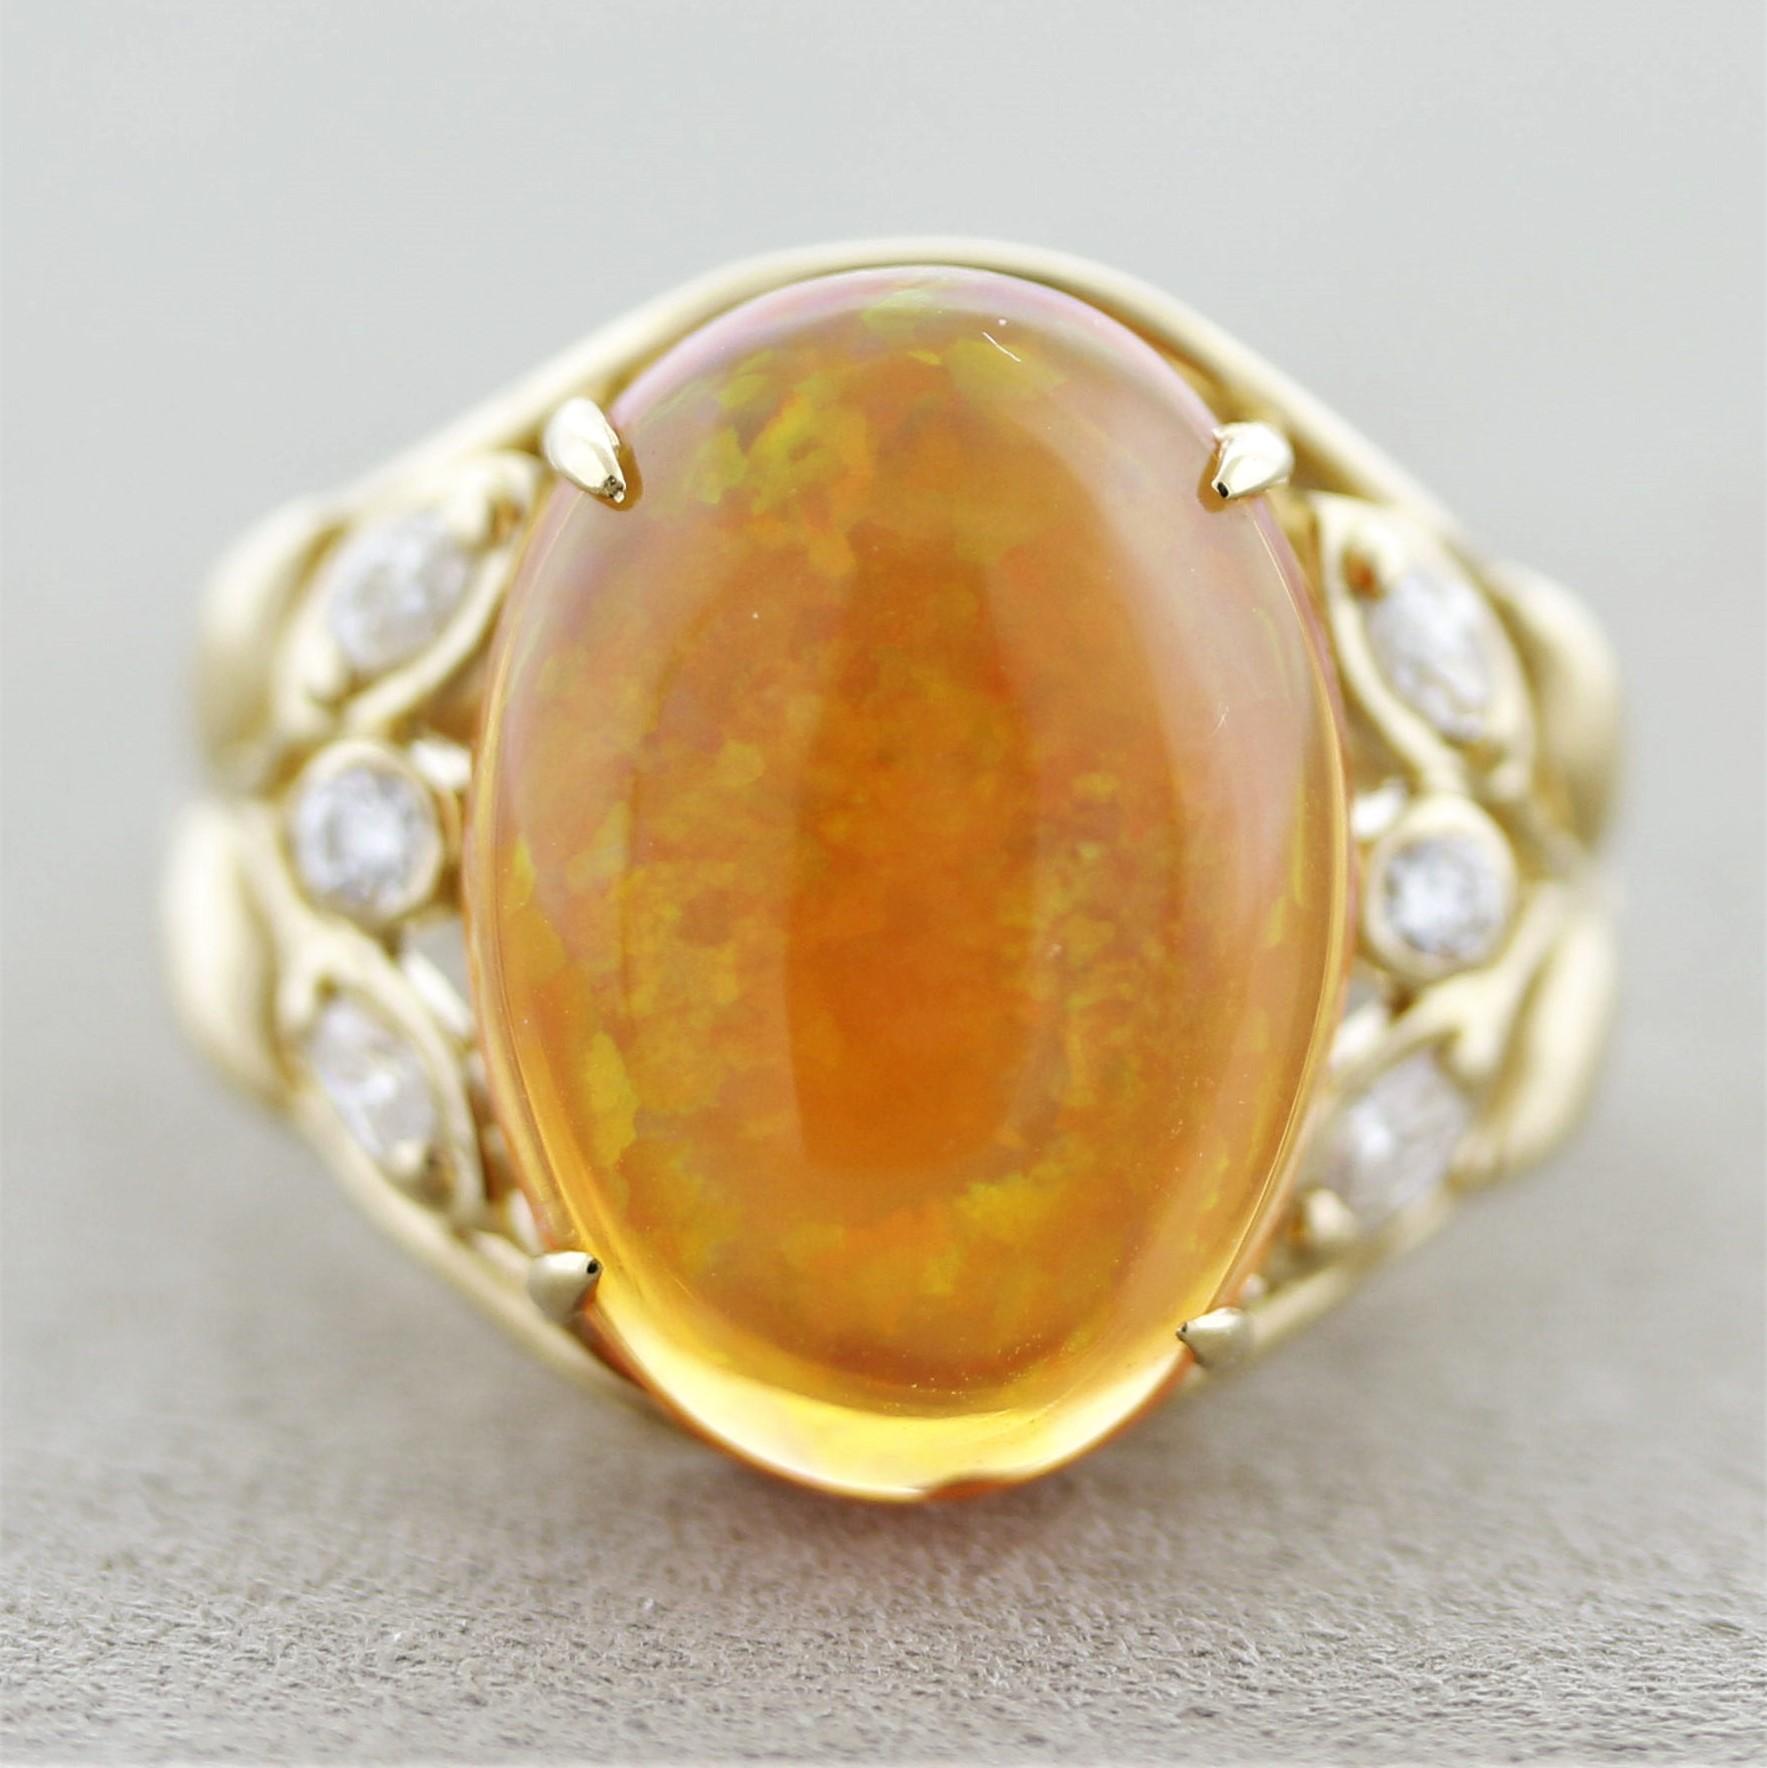 A lovely warm ring featuring a fine fire opal weighing 6.80 carats. It has a rich red-orange color along with excellent play-of-color as flashes of red, orange, yellow and green dance across the stone. It is complemented by 0.26 carats of round